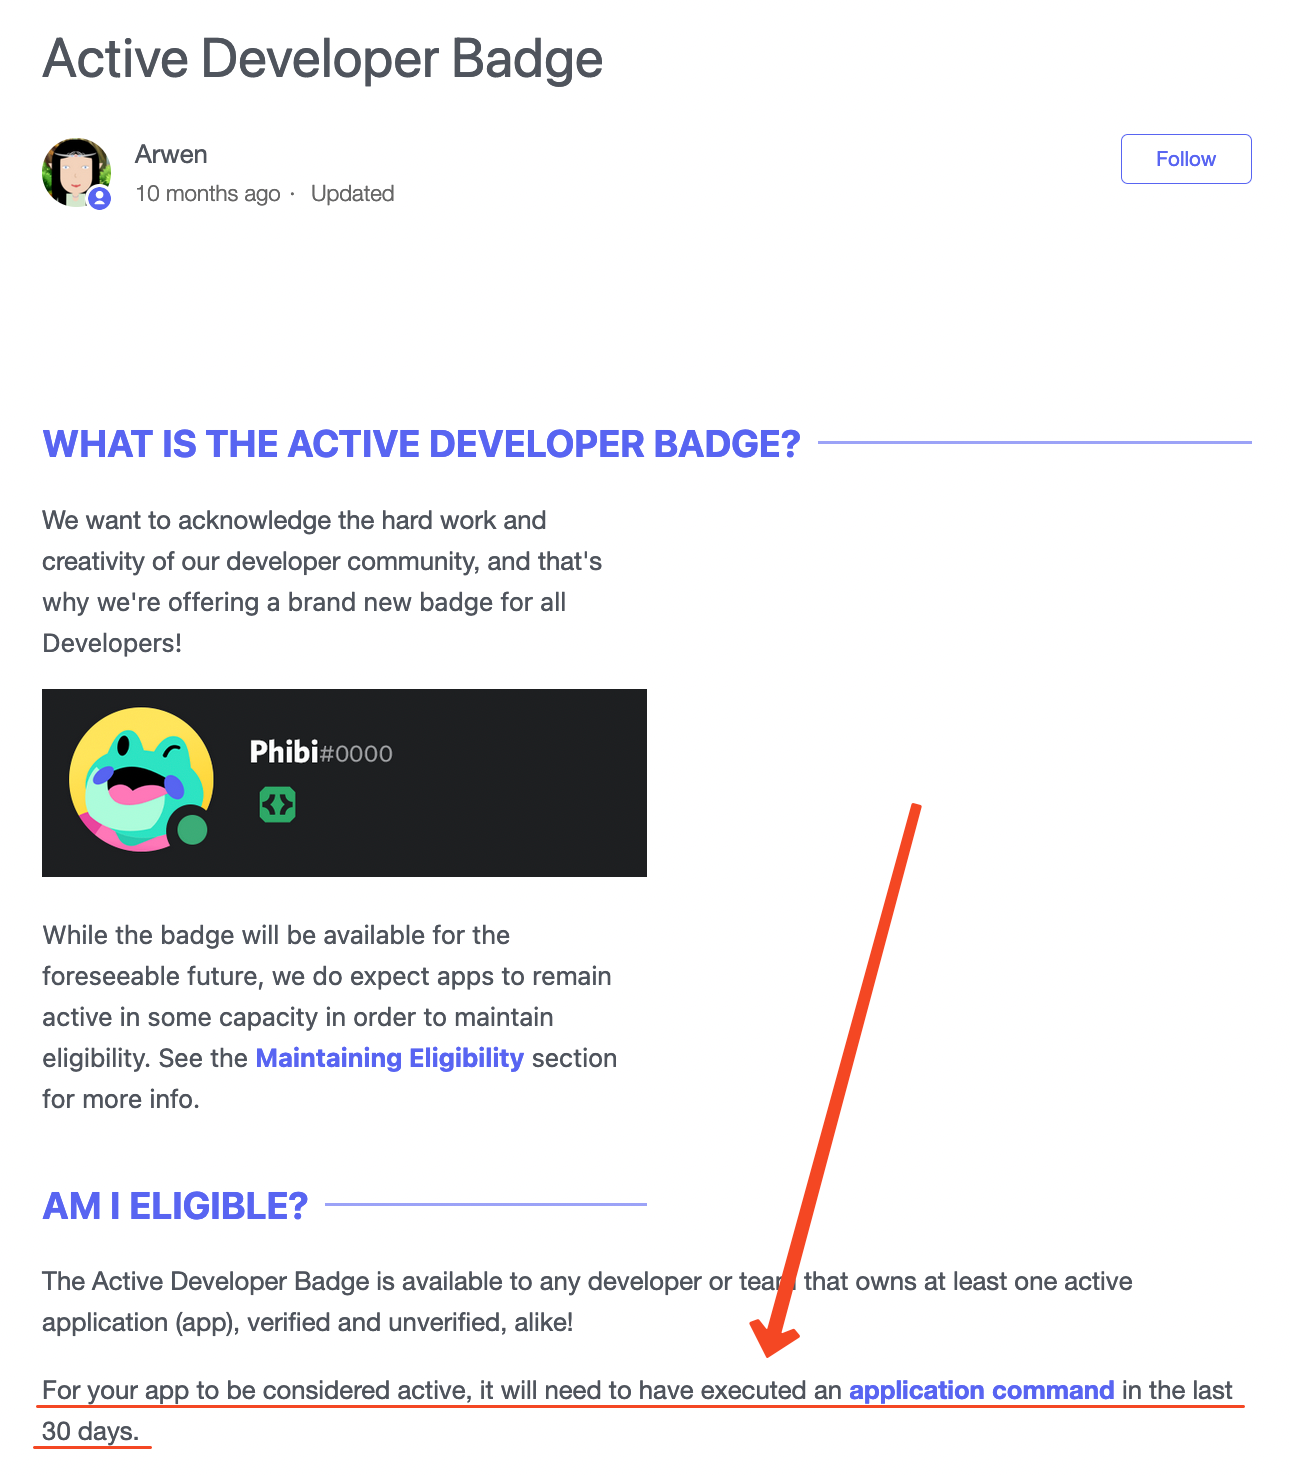 screenshot of discord support article, with orange arrow and underline pointing out "For your app to be considered active, it will need to have executed an application command in the last 30 days."